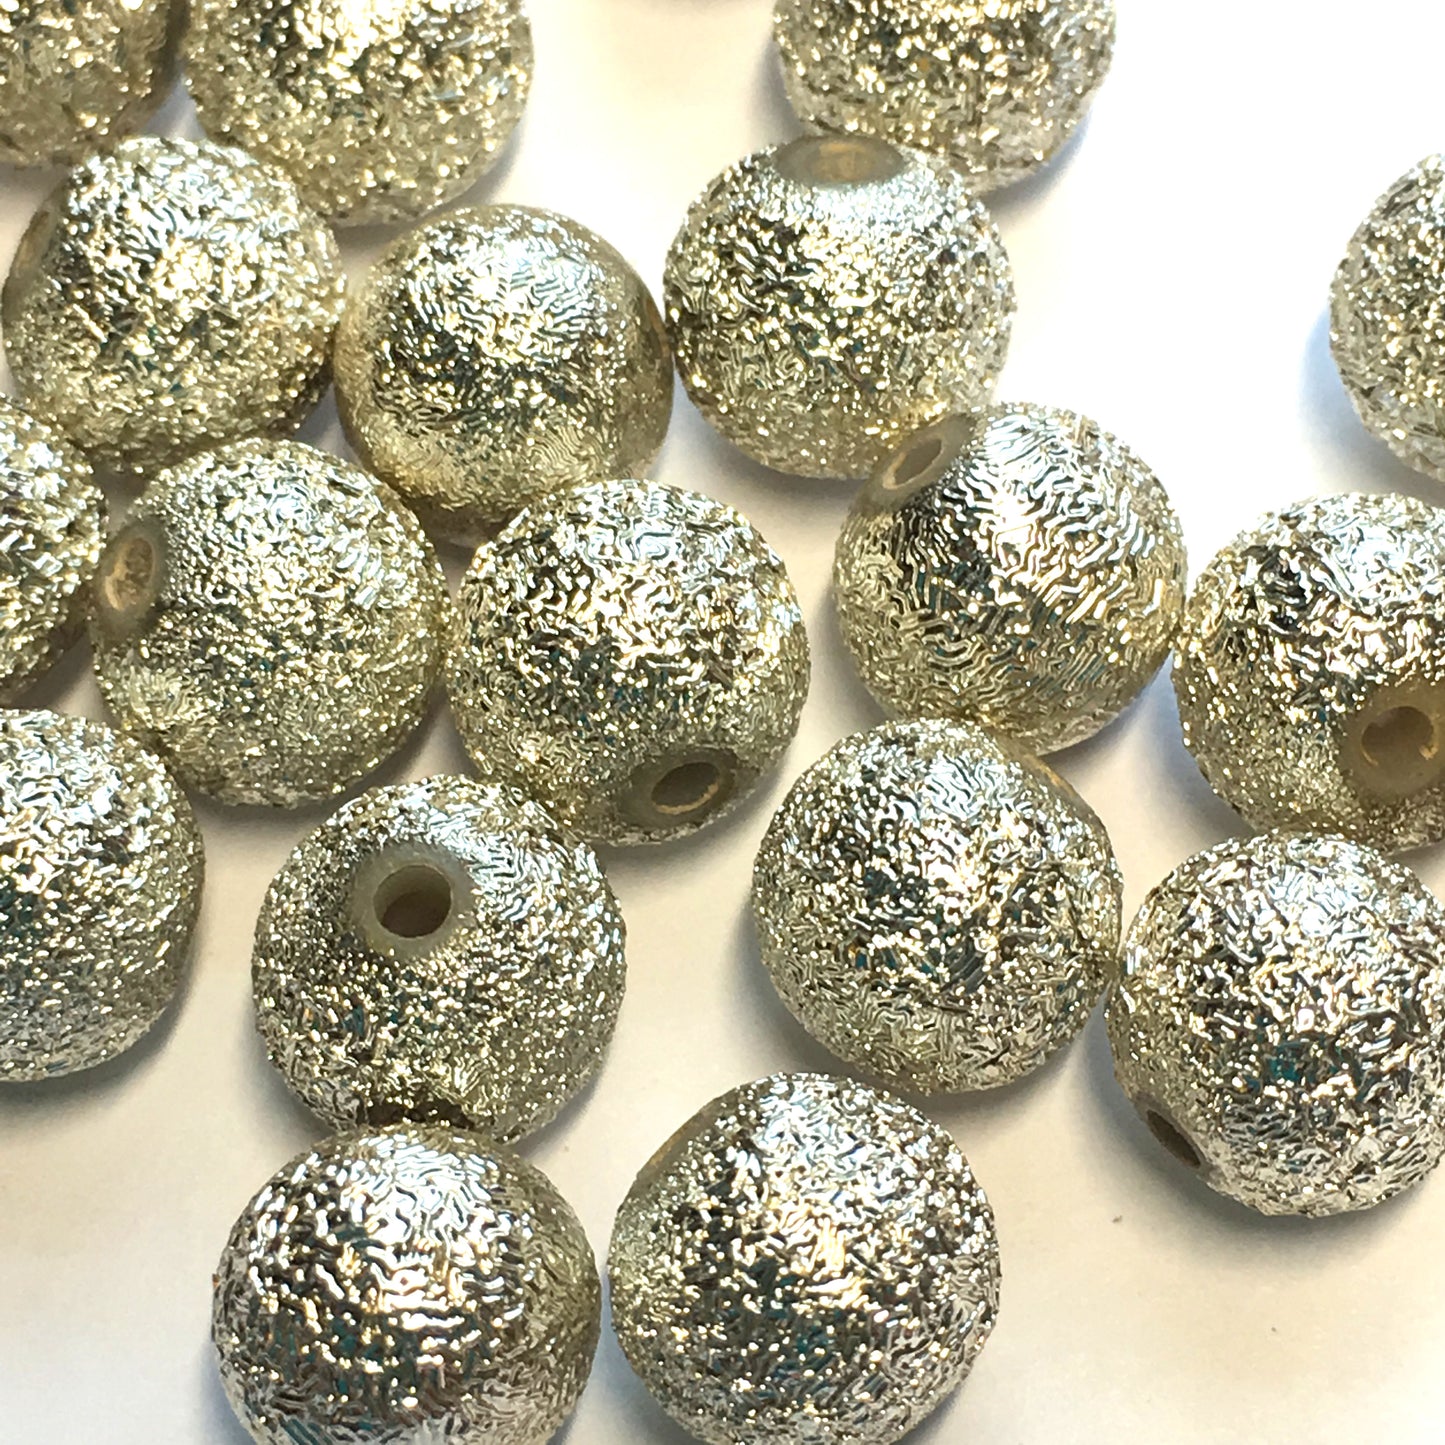 Gold (Pale) Stardust Acrylic Round Beads, 8 mm - 23 or 28 Beads